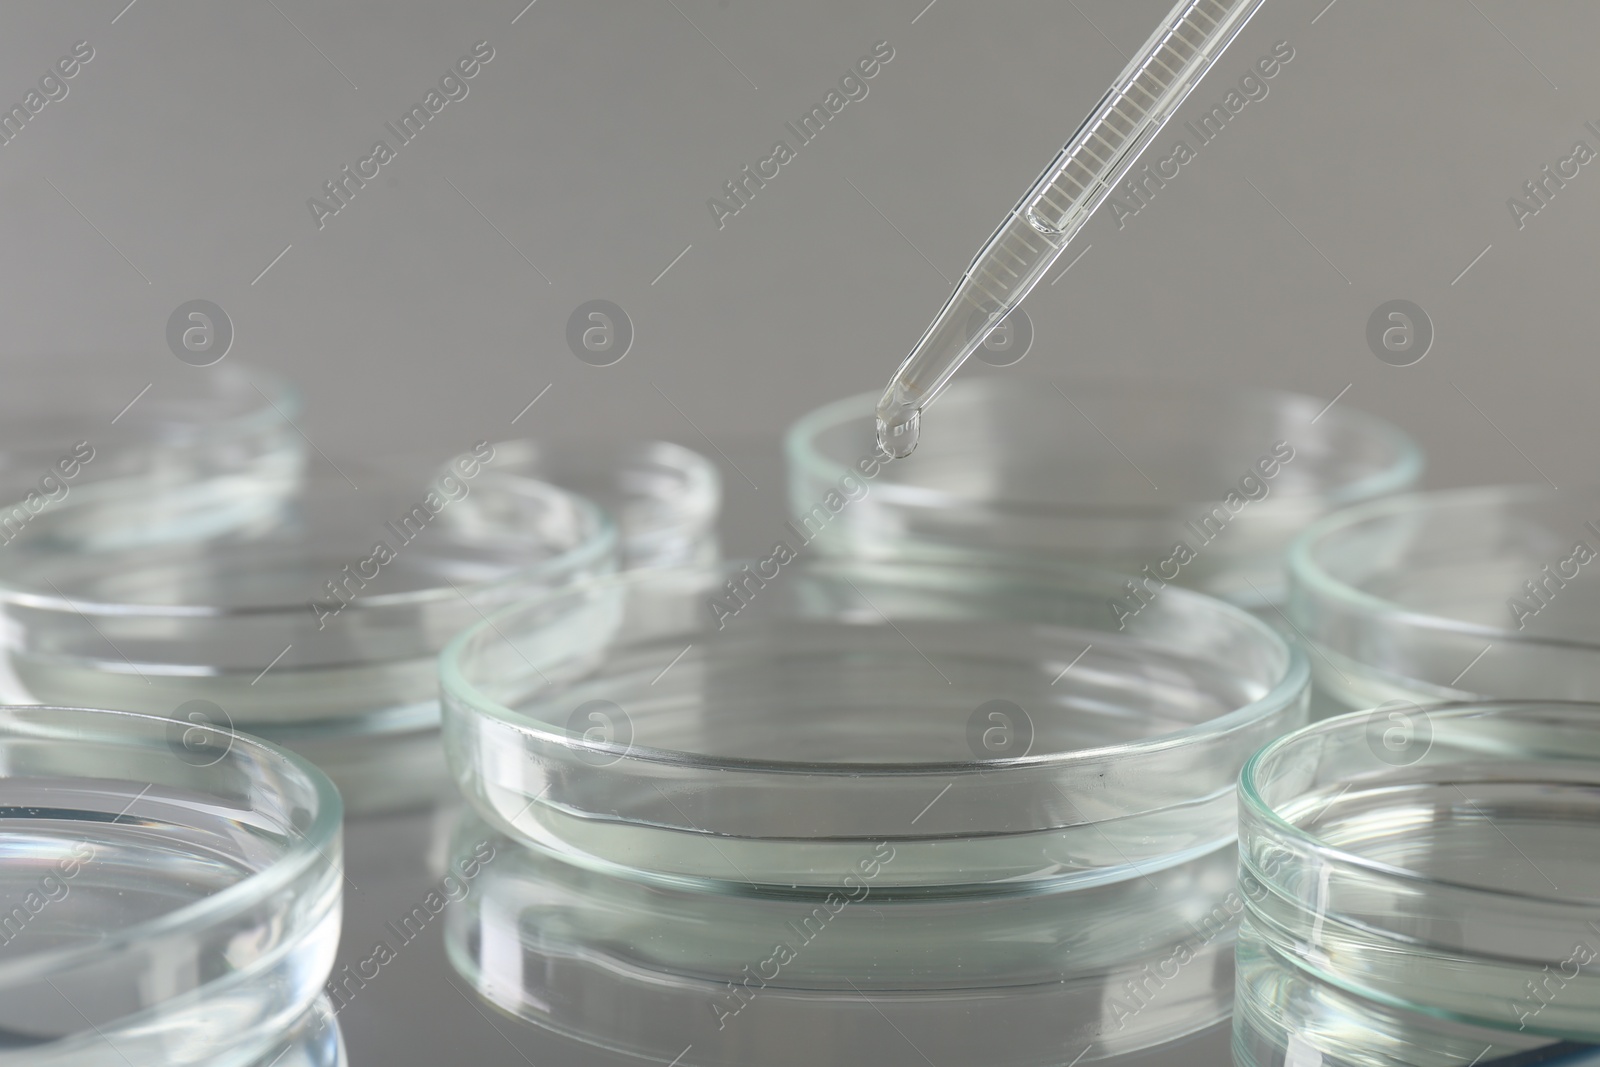 Photo of Dripping liquid from pipette into petri dish on mirror surface against grey background, closeup